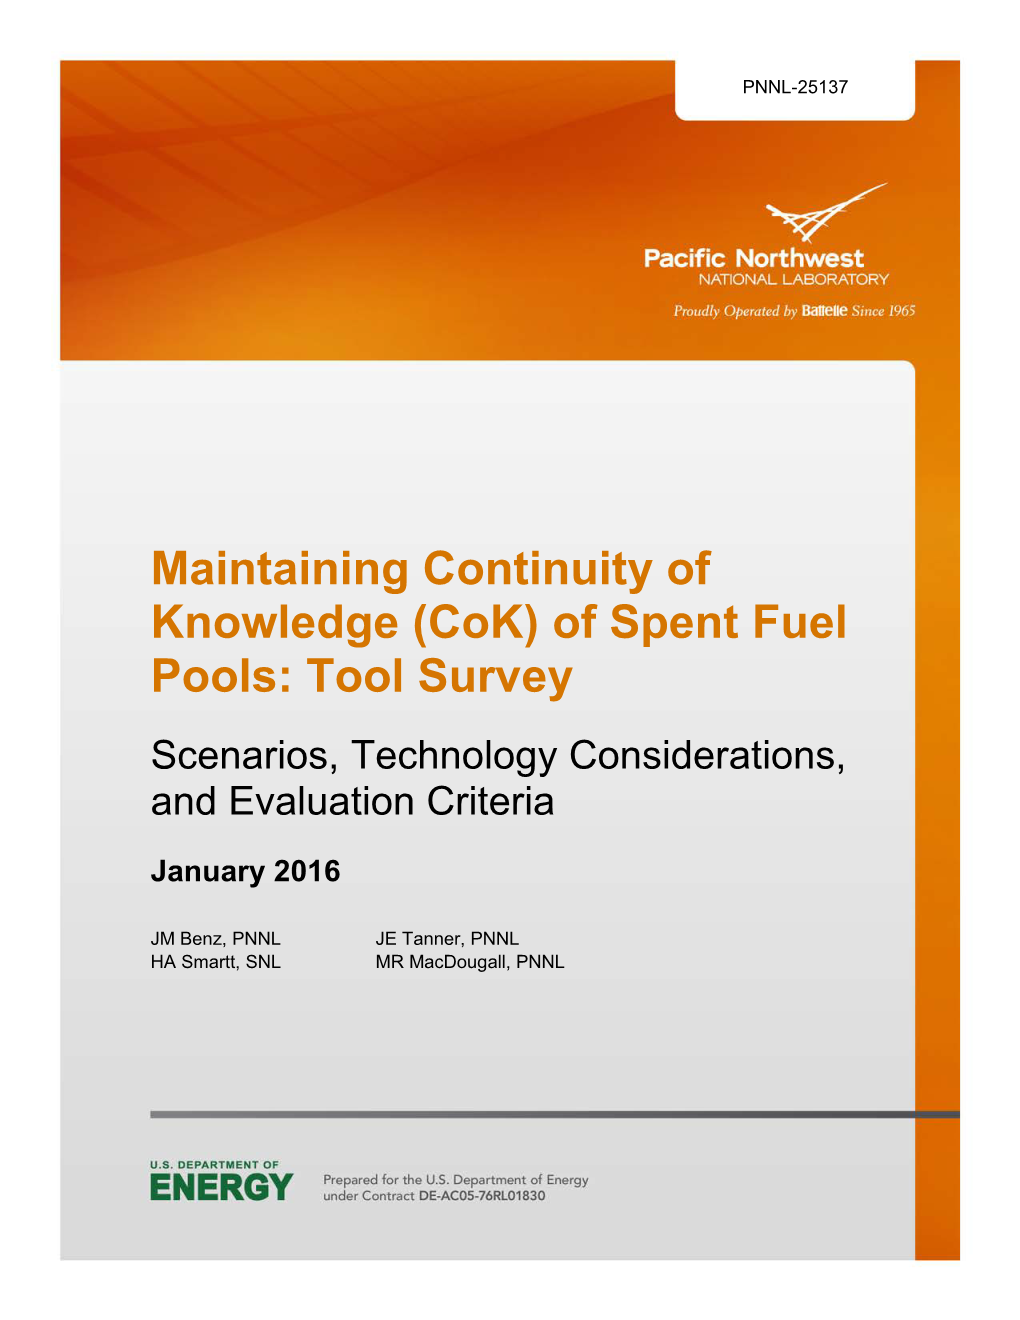 Of Spent Fuel Pools: Tool Survey Scenarios, Technology Considerations, and Evaluation Criteria